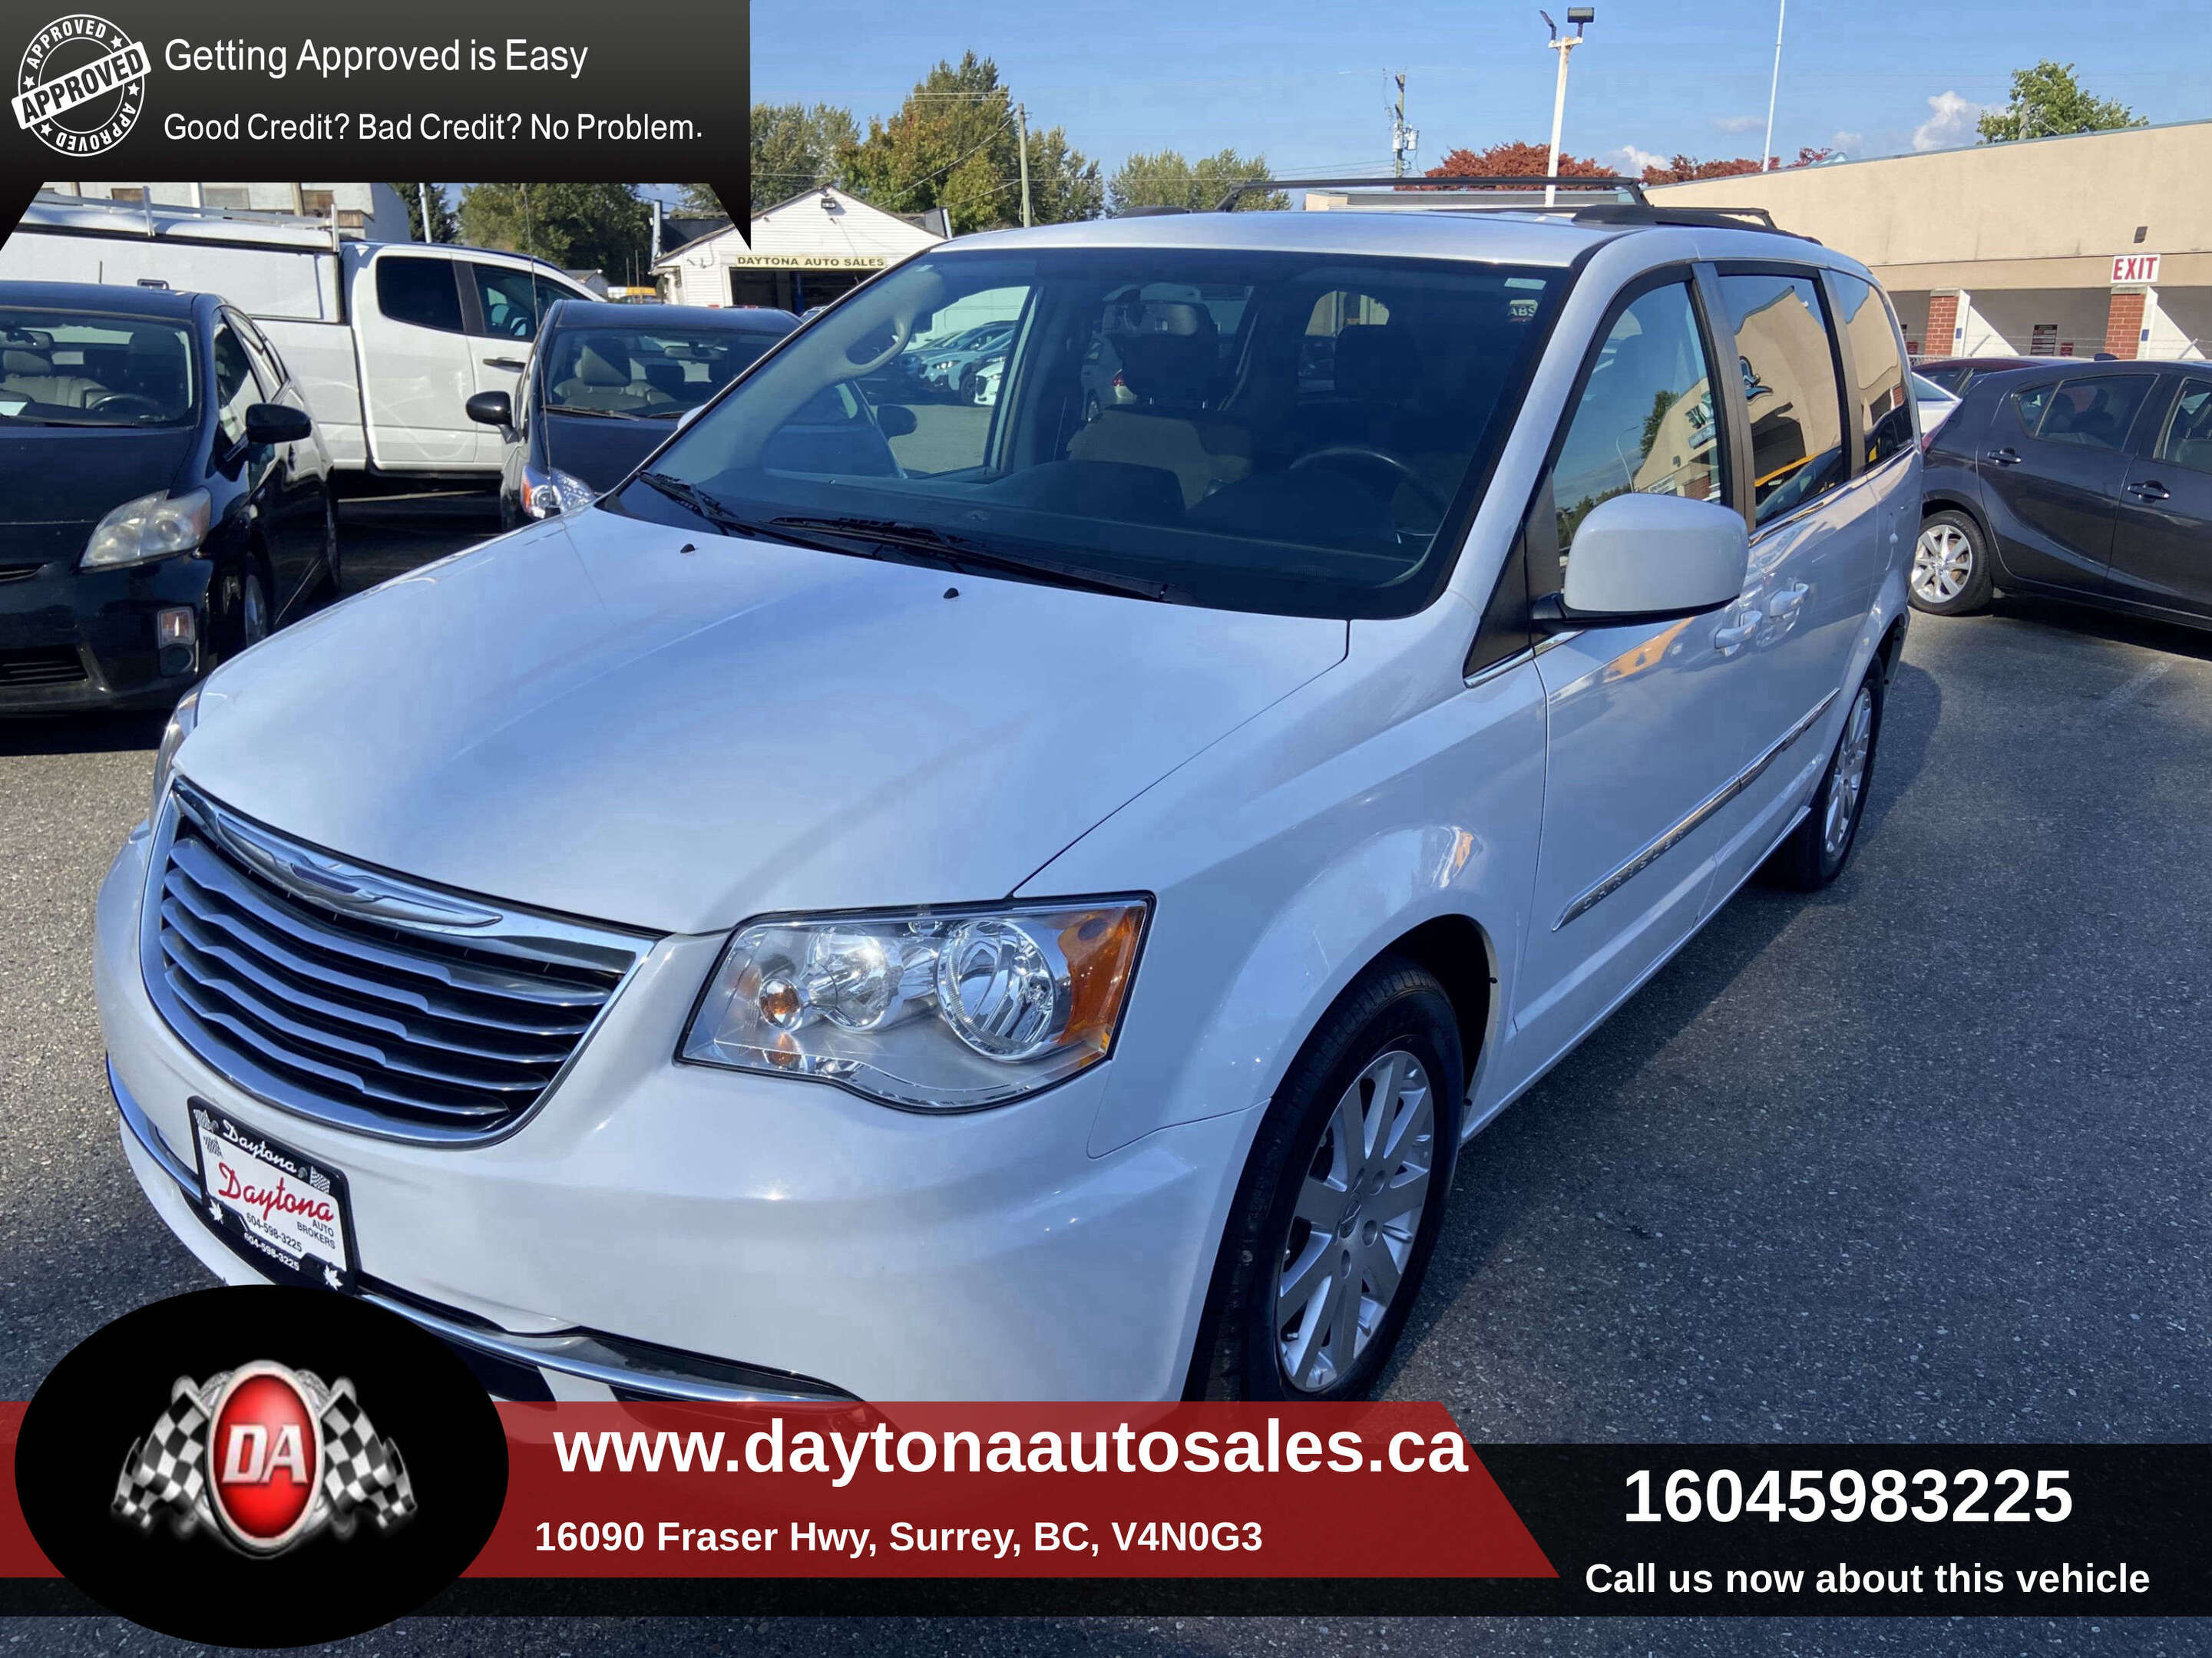 2016 Chrysler Town & Country 4dr Wgn Touring, no accidents, we finance, 